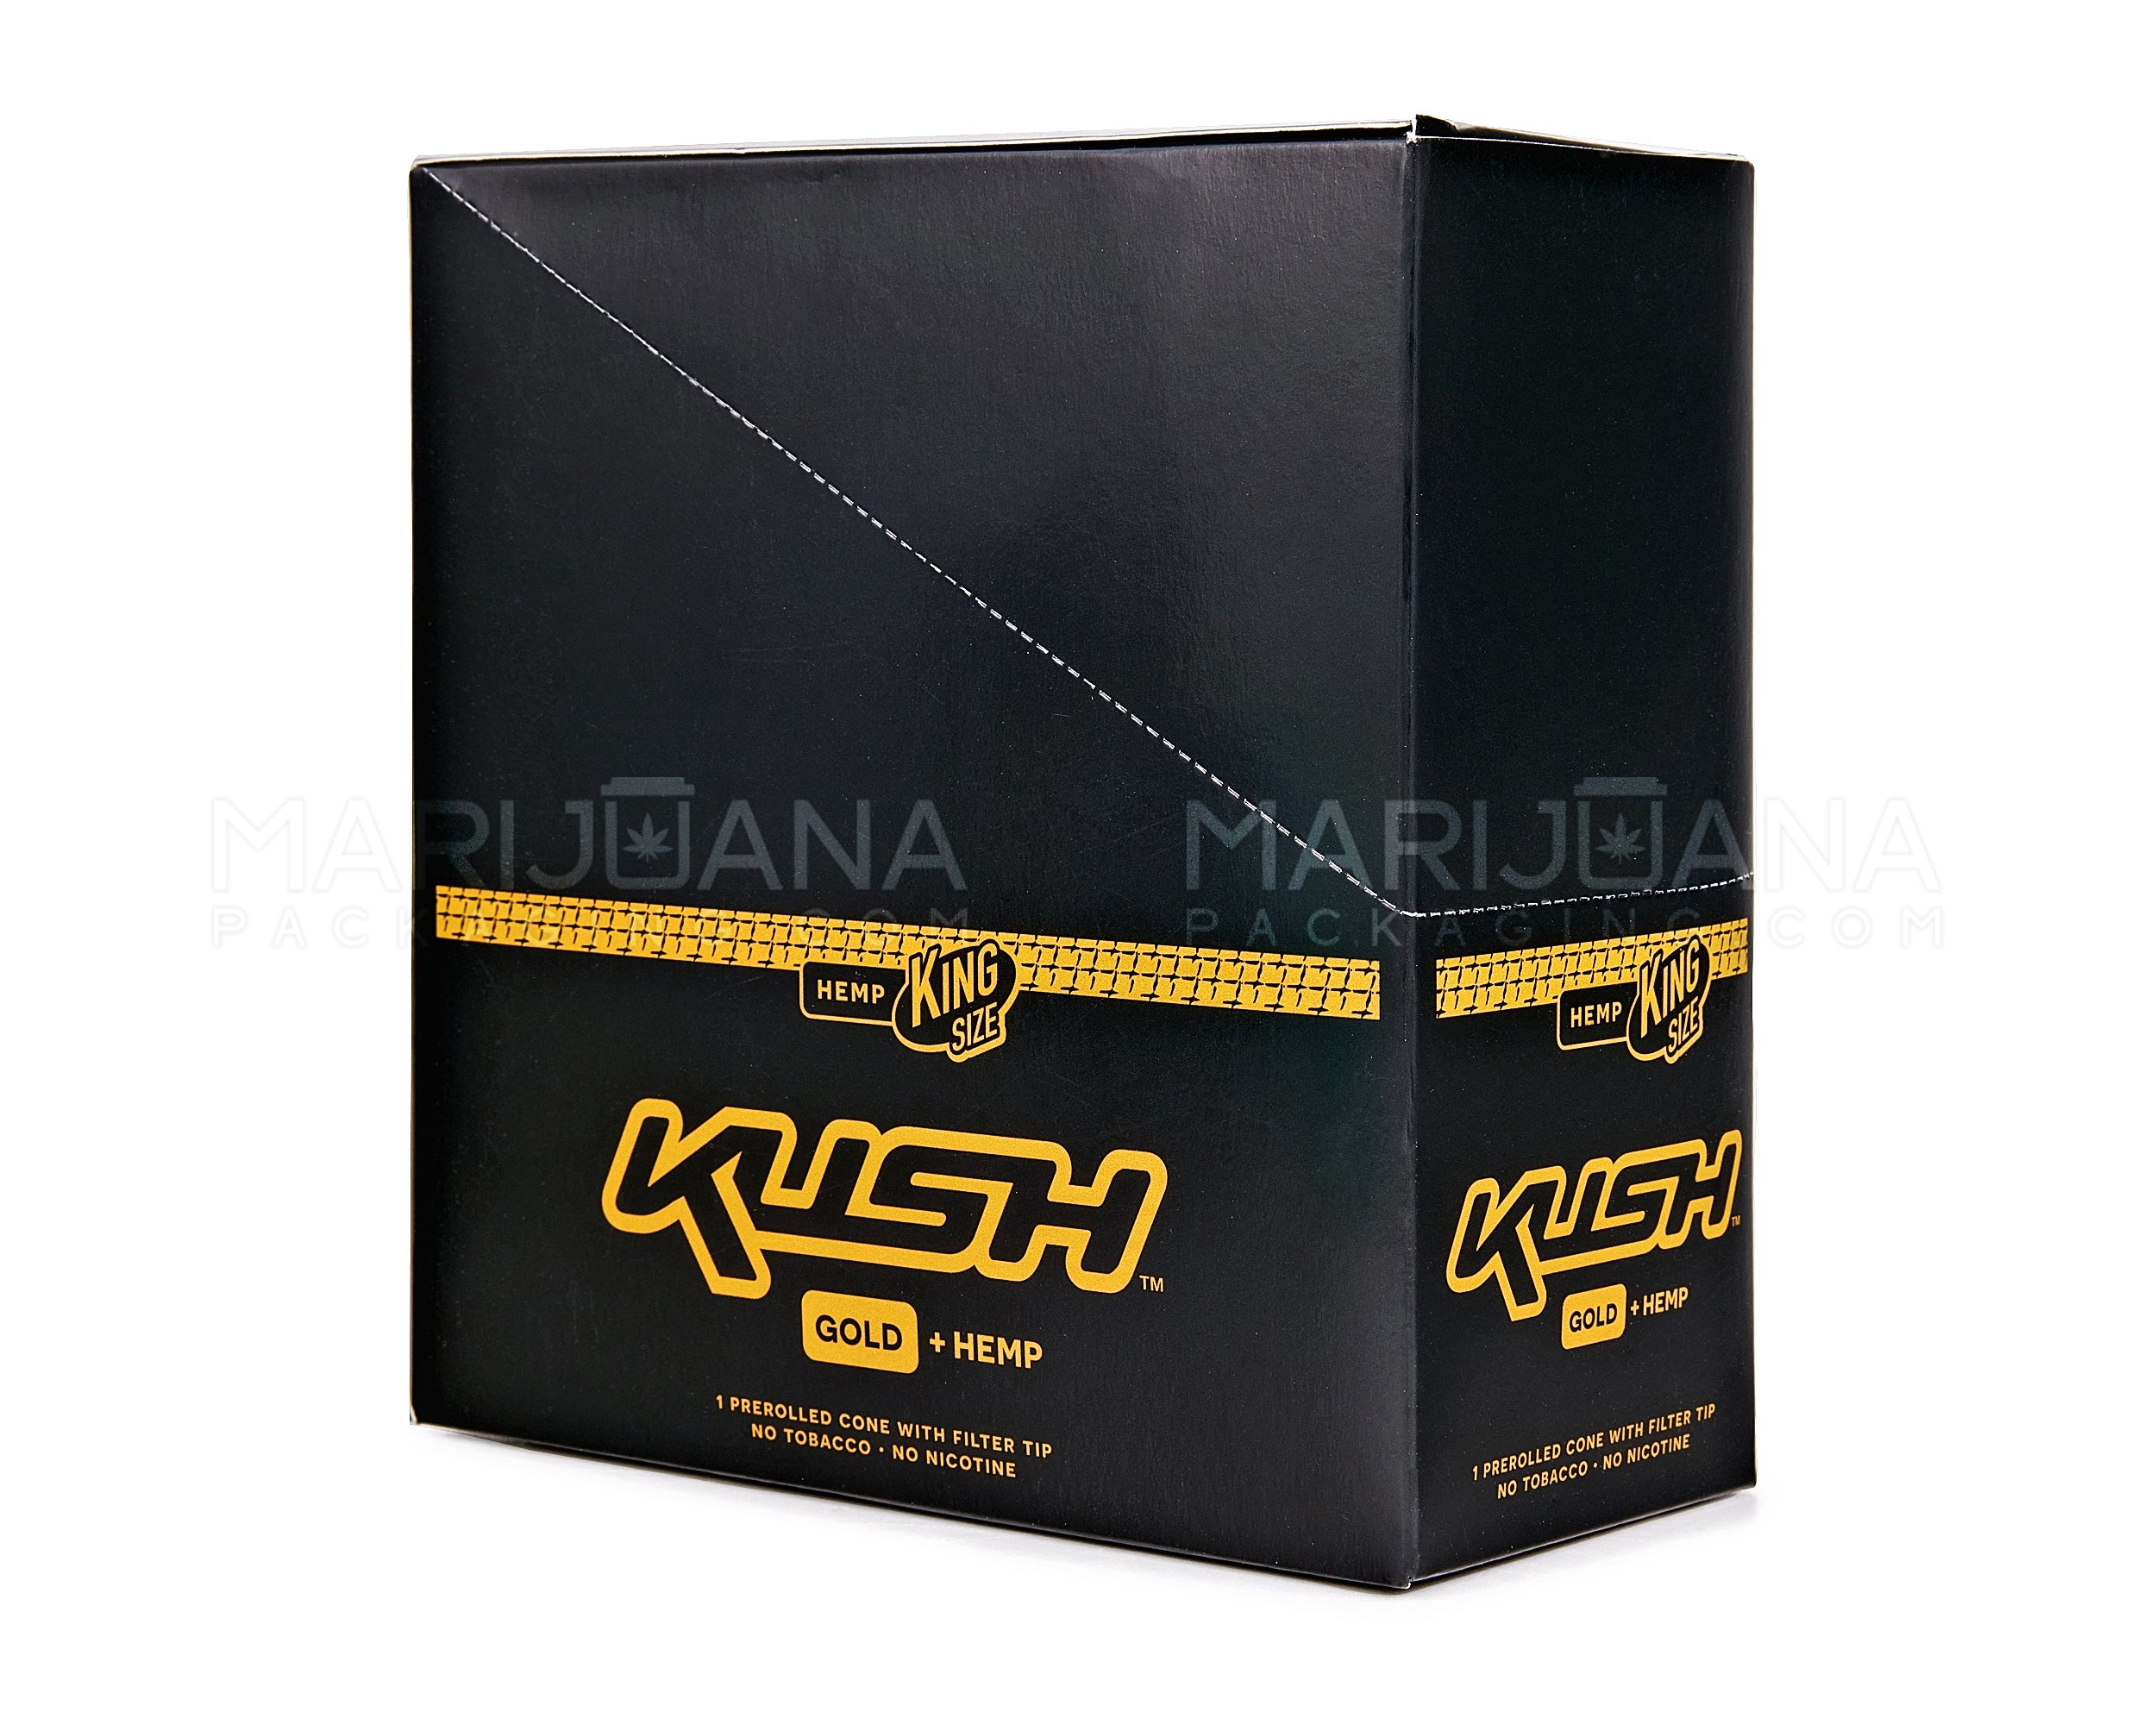 KUSH | 'Retail Display' 24K Gold King Size Hemp Pre Rolled Cones | 63mm - Edible Gold - 8 Count - 6